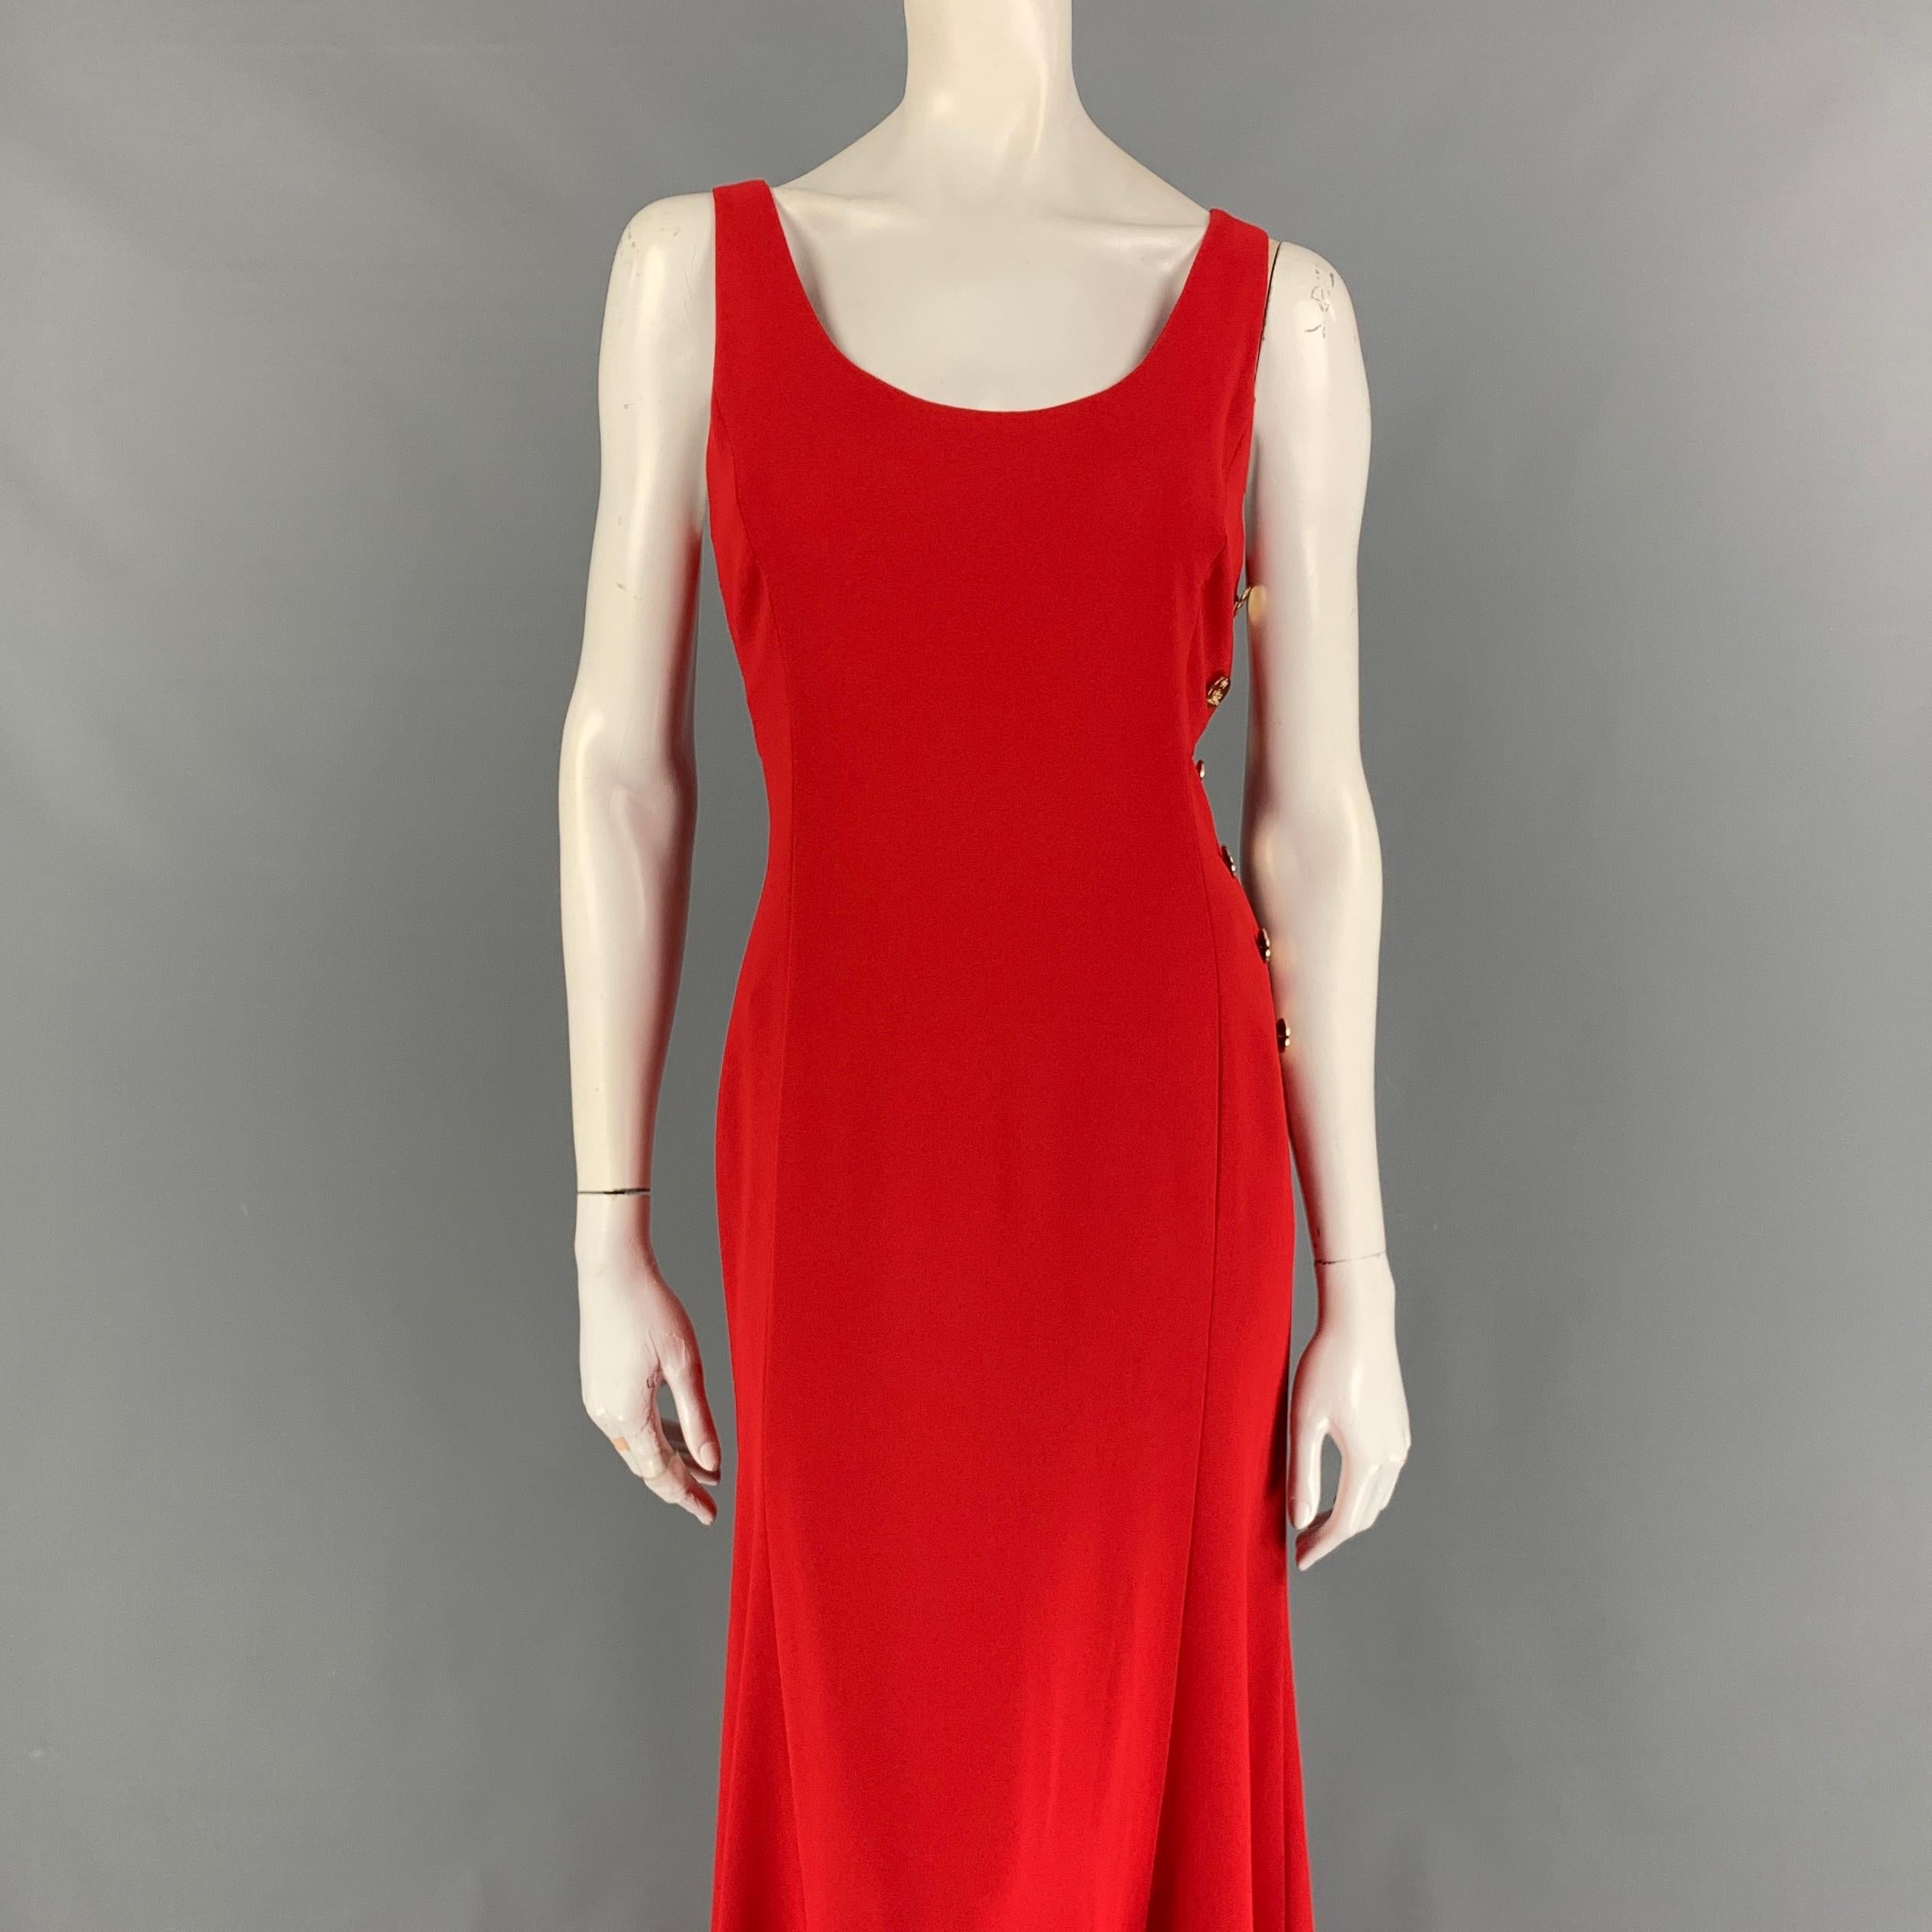 RALPH LAUREN Collection dress comes in a red polyester featuring a sleeveless style, a-line, gold tone button details, and a back zip up closure. Made in Italy.

Very Good Pre-Owned Condition.
Marked: 8

Measurements:

Bust: 34 in.
Waist: 31